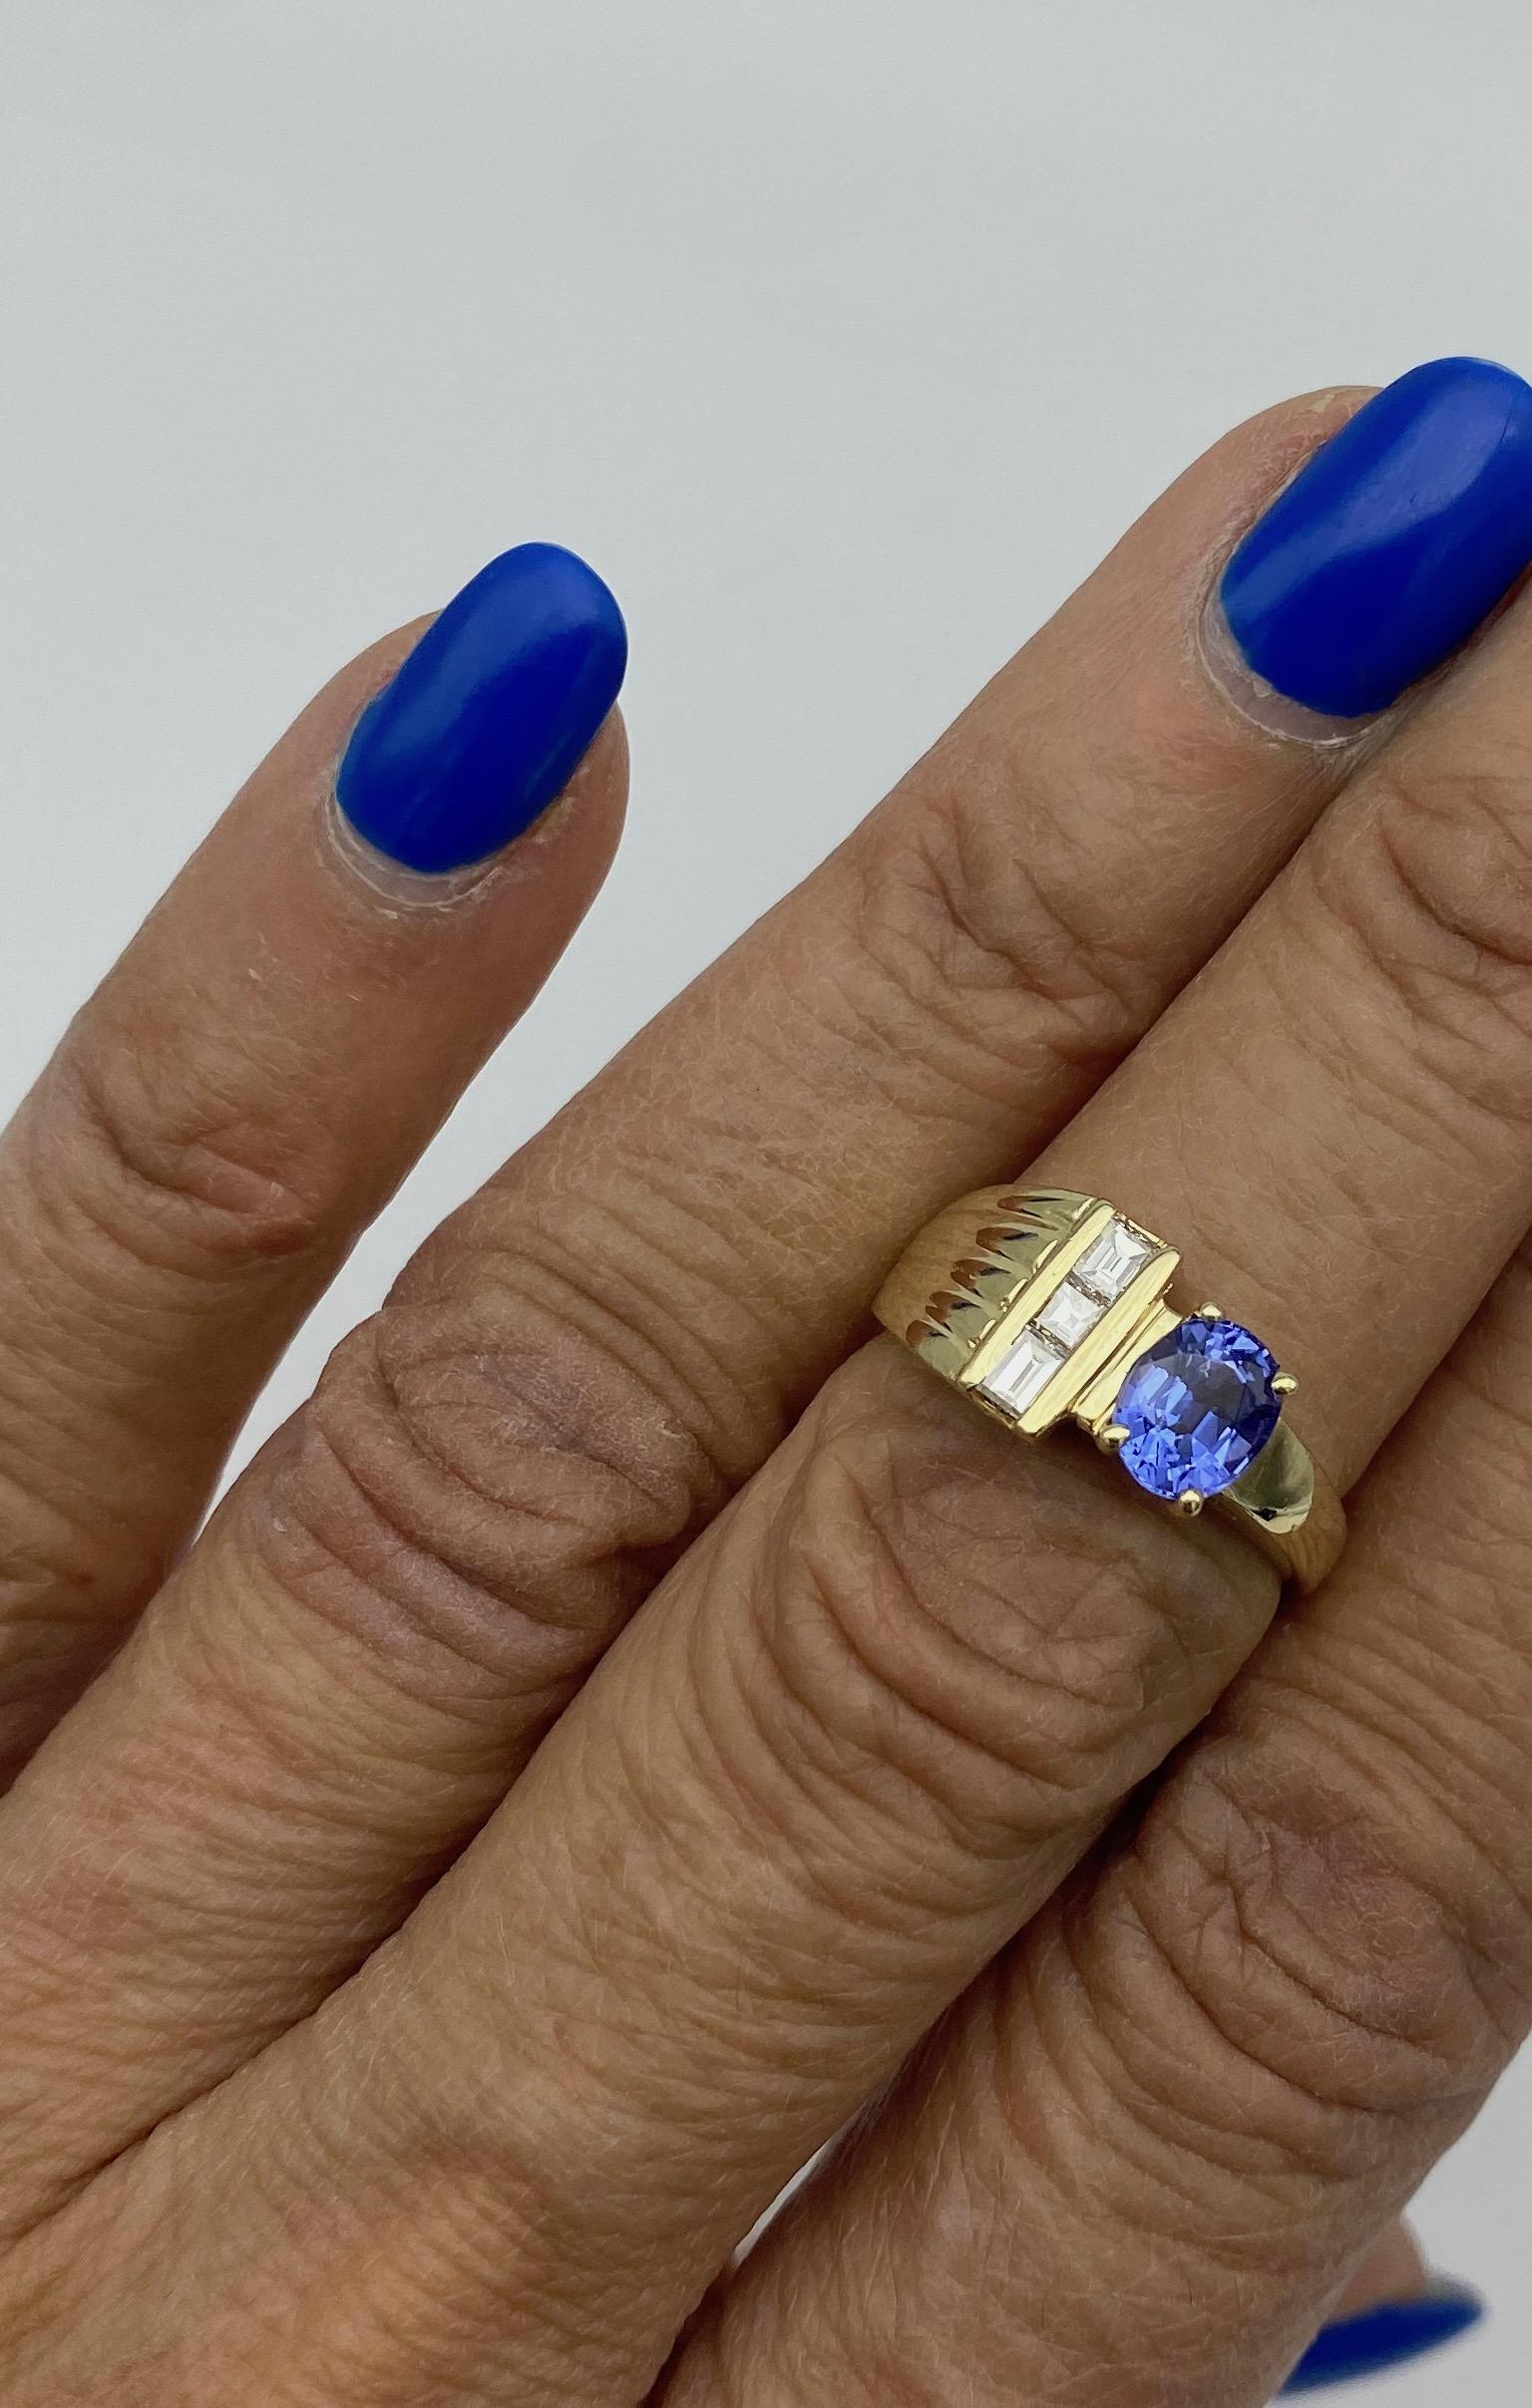 Tanzanite and Diamond Ring is a striking contemporary style set in 14 karat Yellow Gold.
The oval-shaped tanzanite measures 6.90 x 5.63 mm in diameter, weighing approximately 1.00 carat.
3- diamonds are channels set on the side of the ring. The cuts